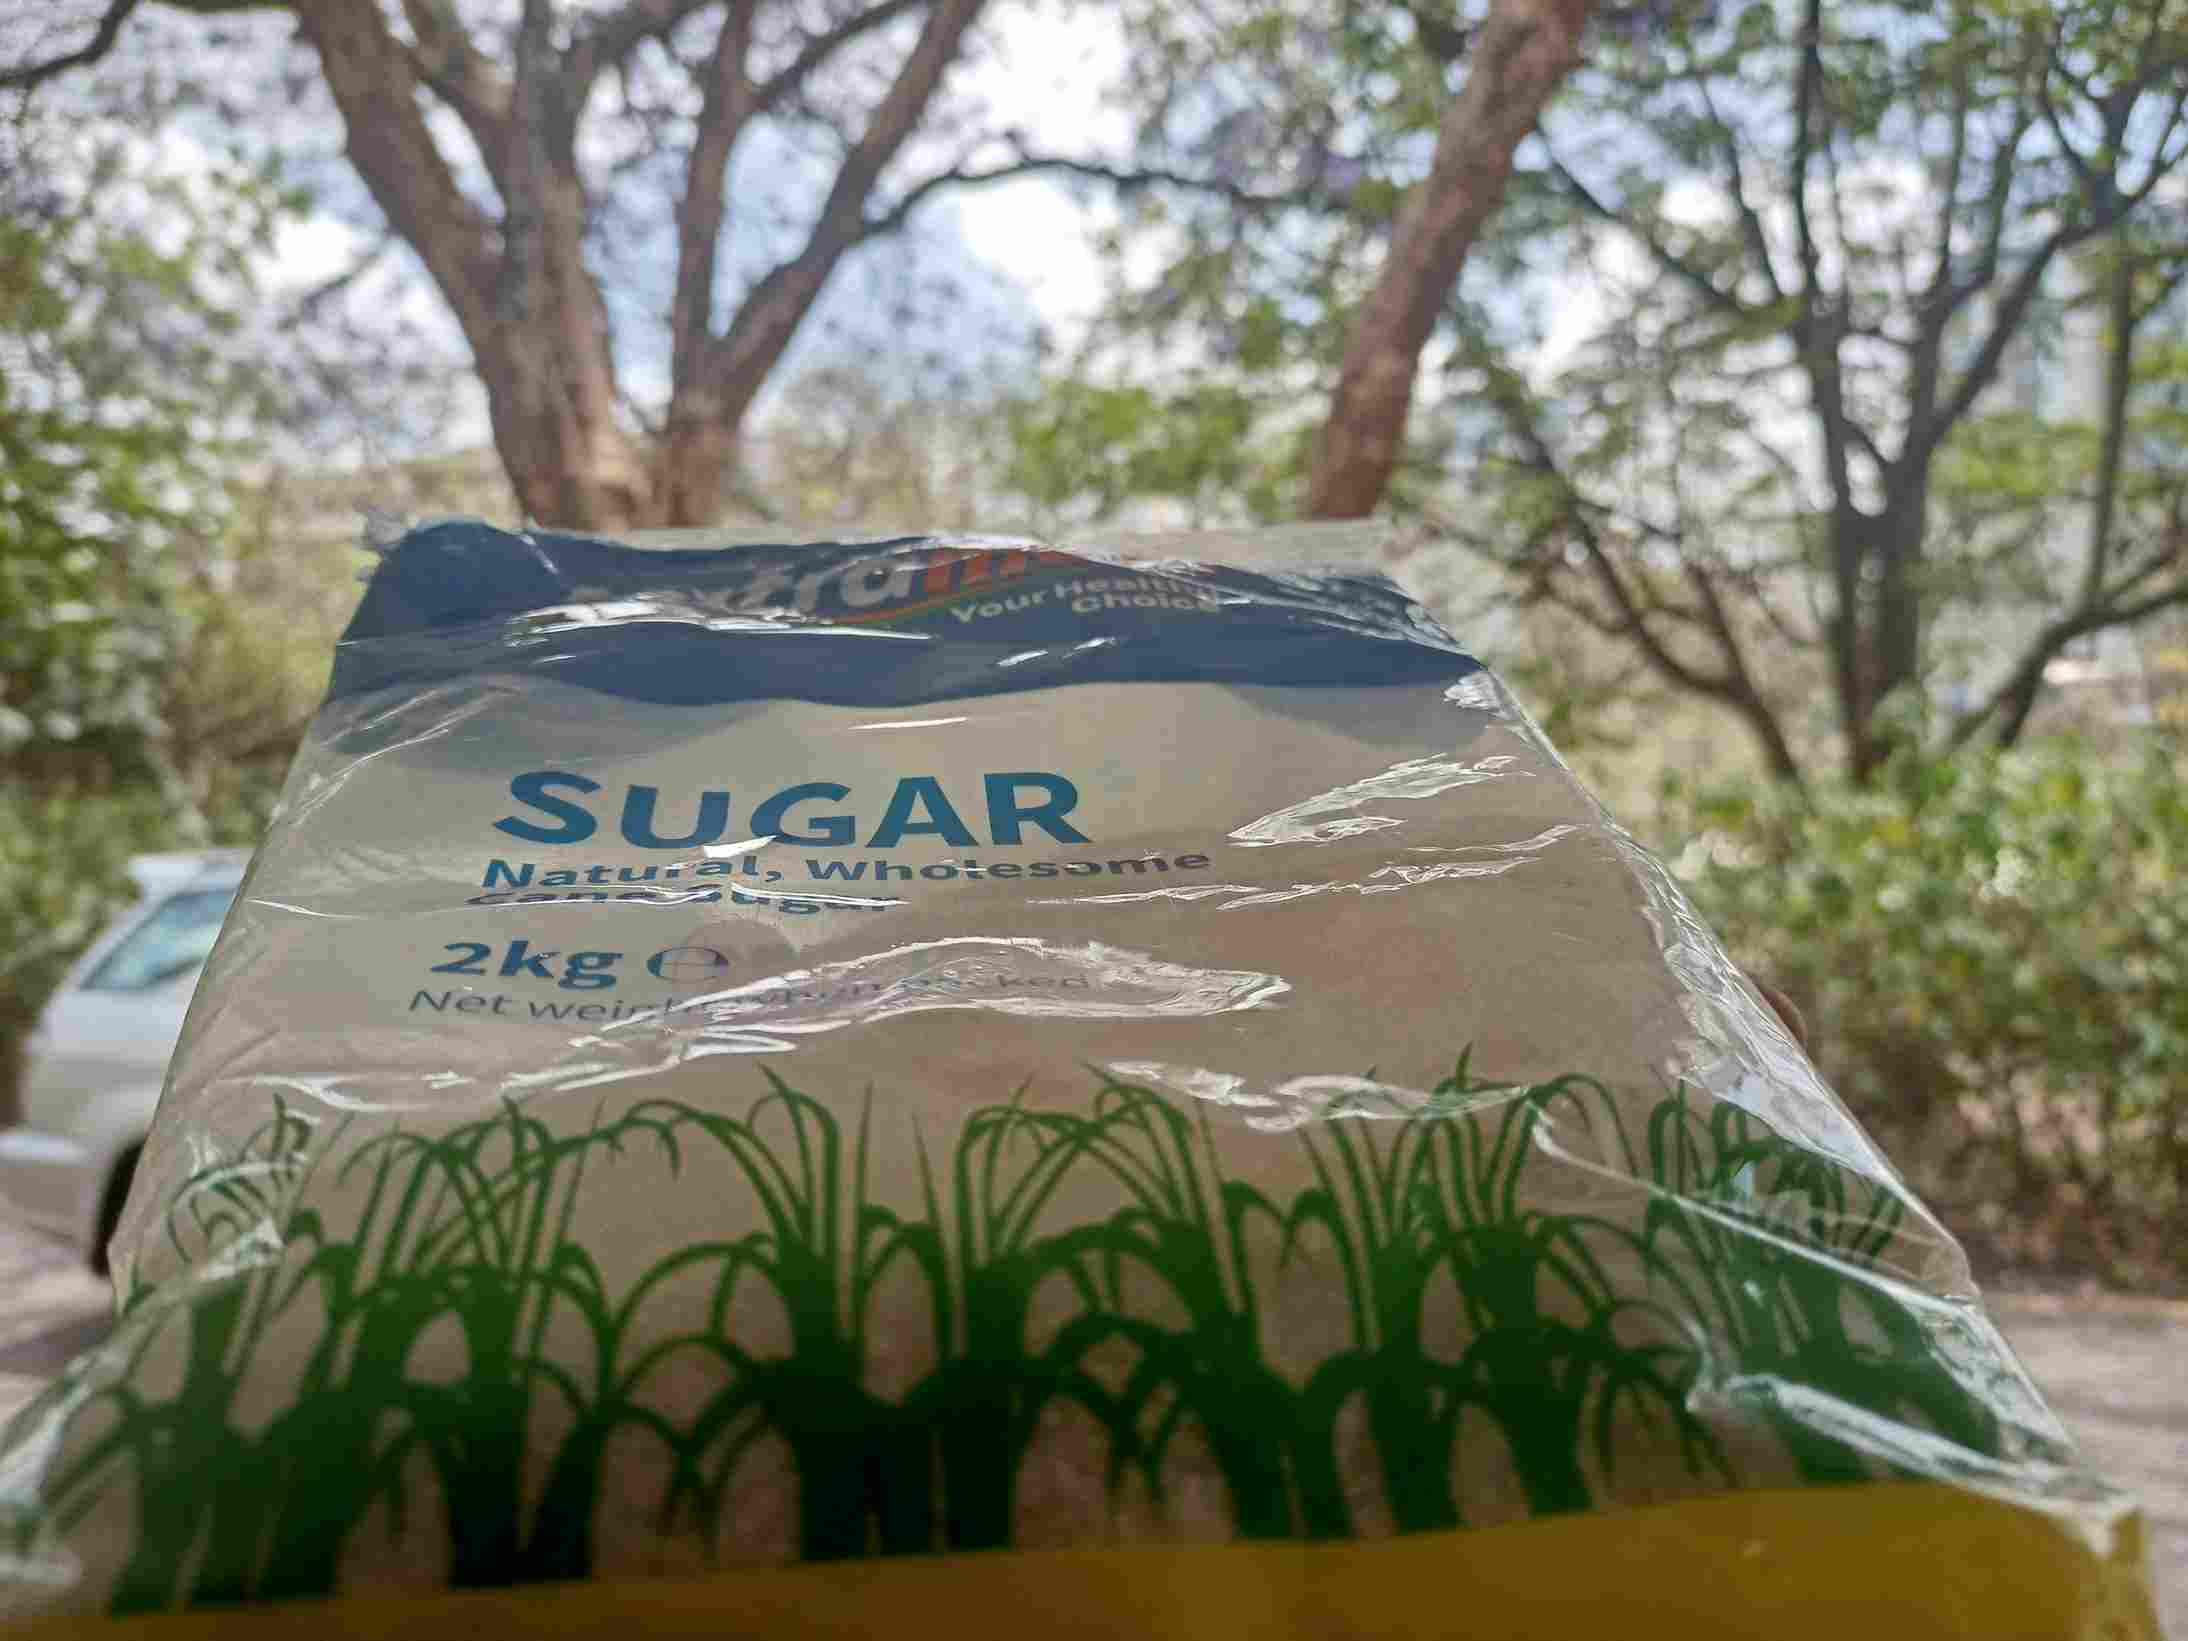 Commodity: A 2Kg Packet of Sugar one of the key commodities affecting Kenya inflation in May